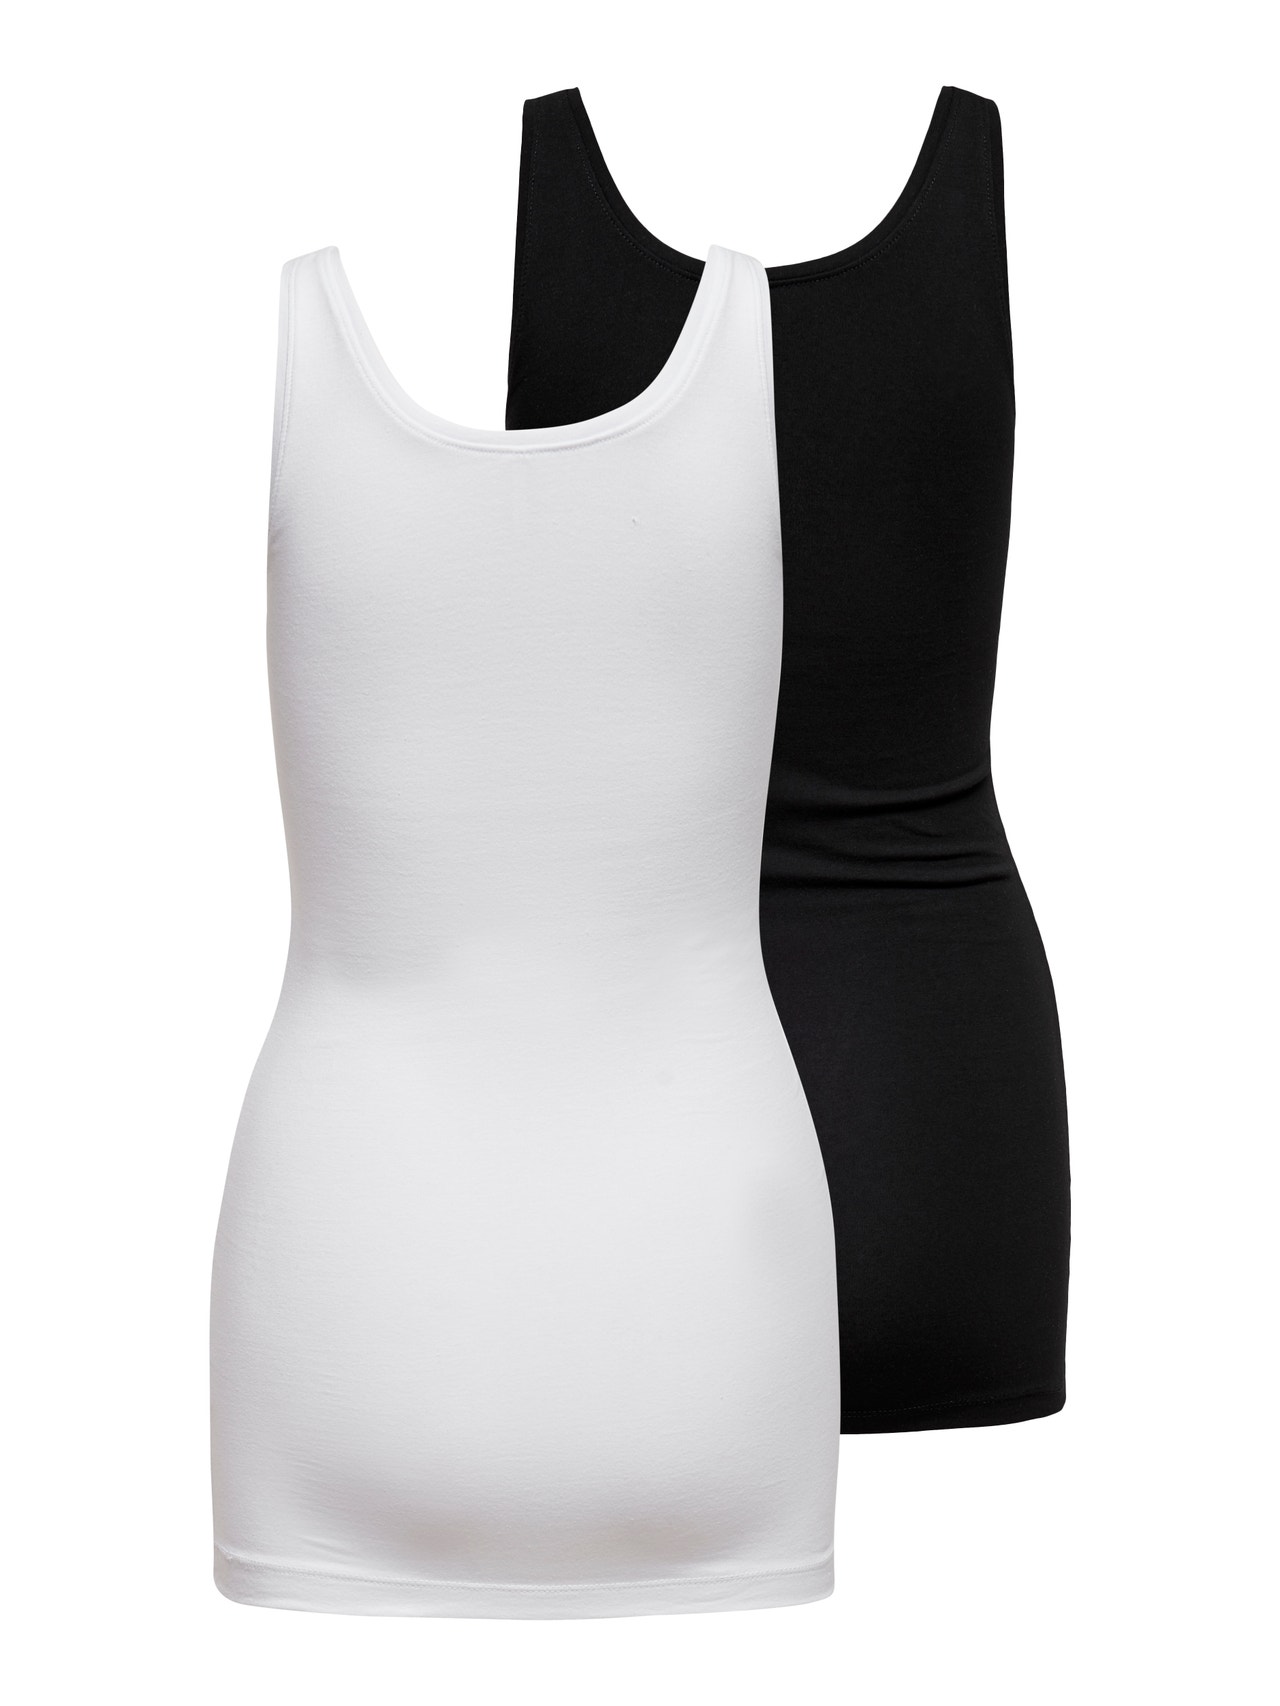 https://images.only.com/15149050/2691858/002/only-2-packbasiclongtanktop-black.jpg?v=cc5fe1202da9203d311b180e9fa875d8&format=webp&width=1280&quality=90&key=25-0-3